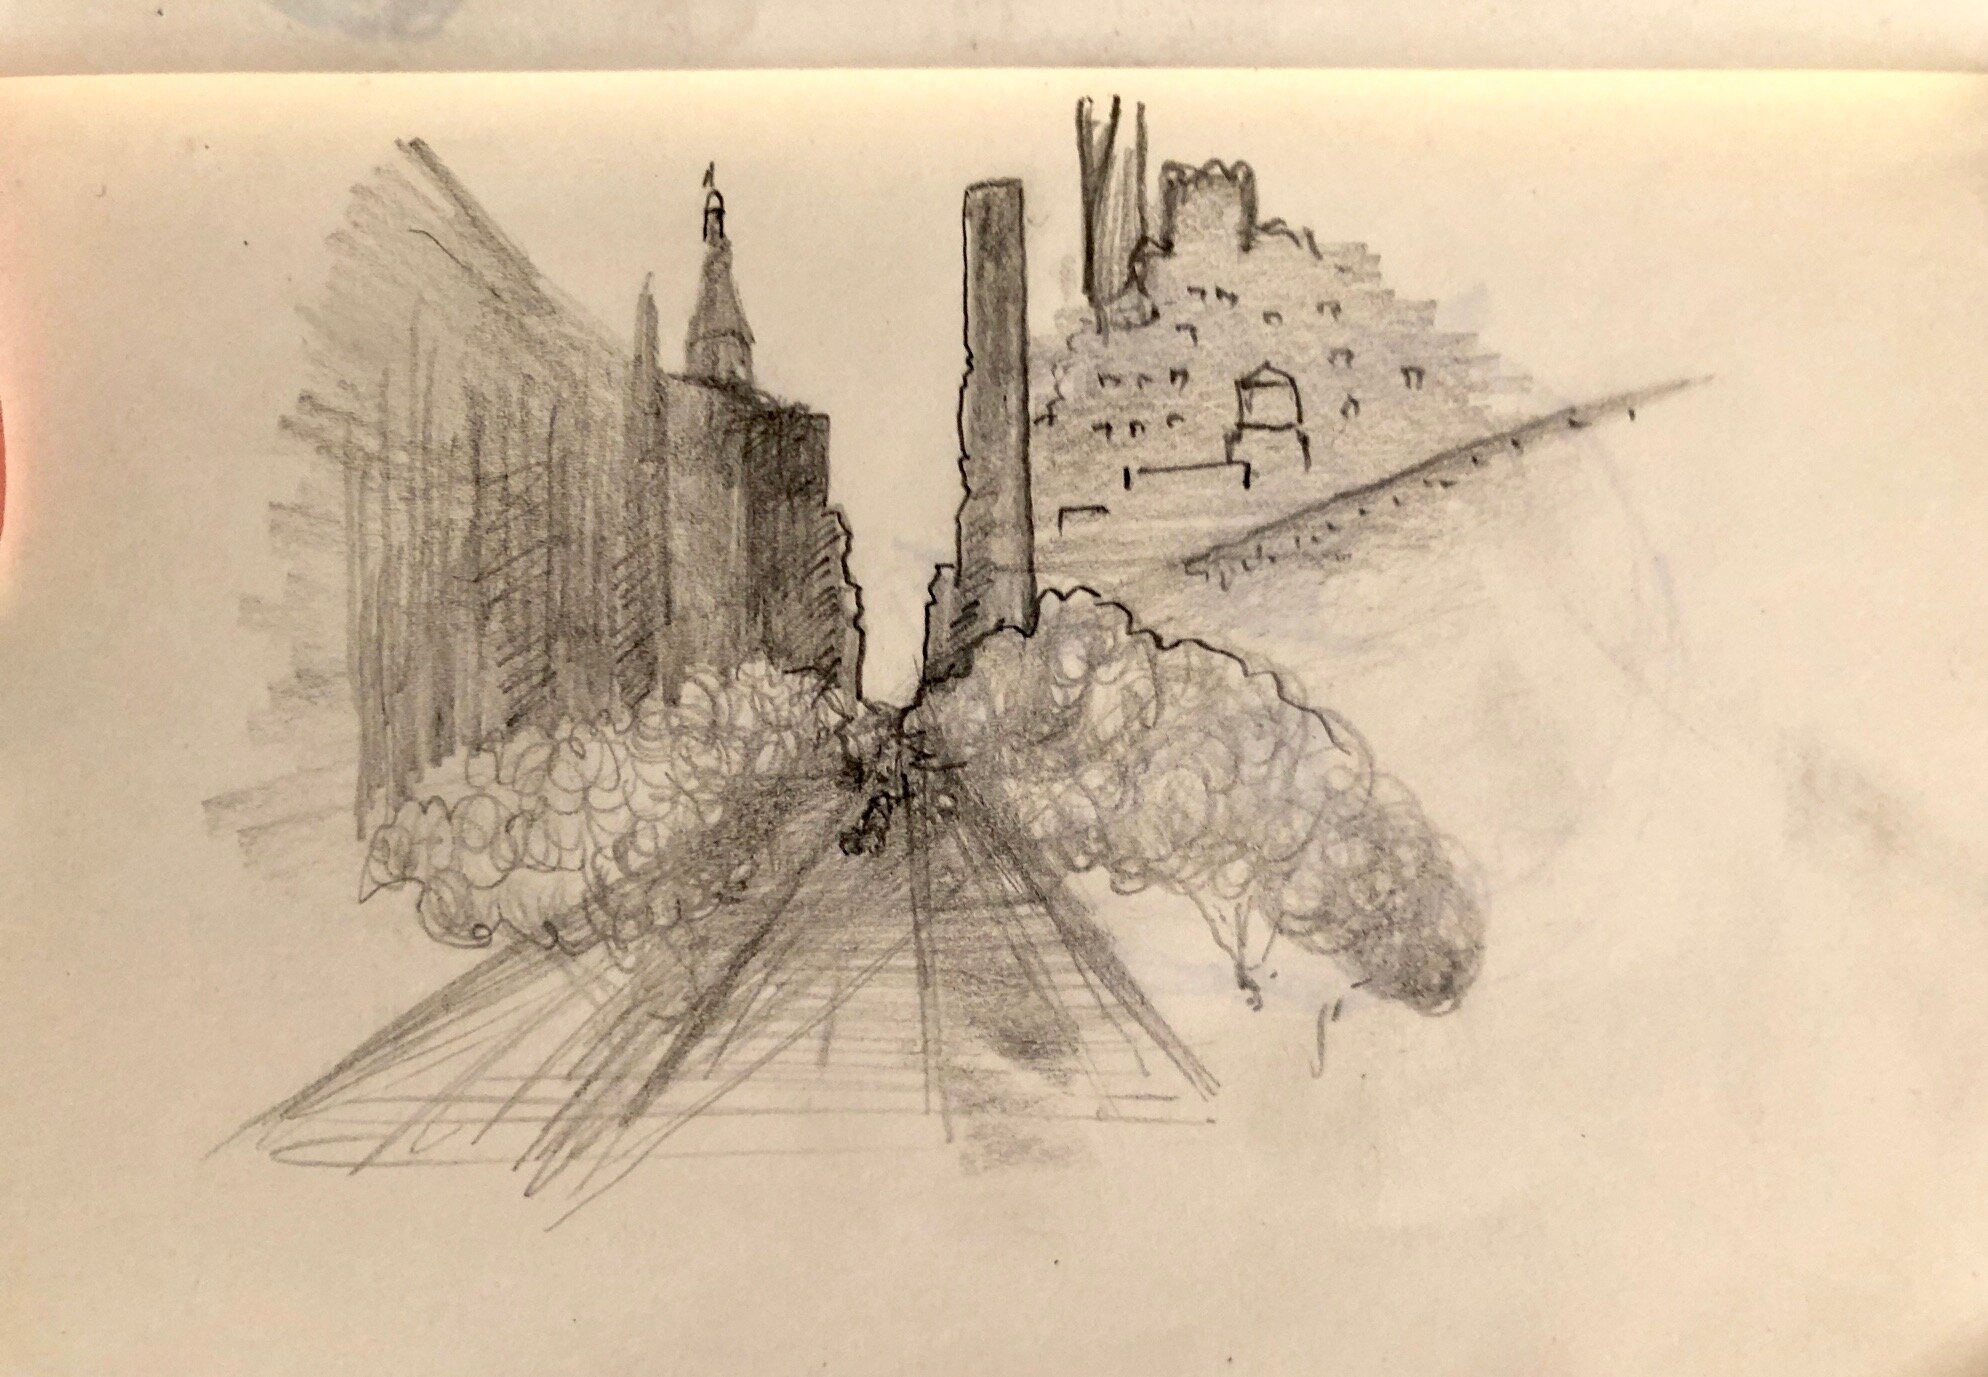 Drawn to the City